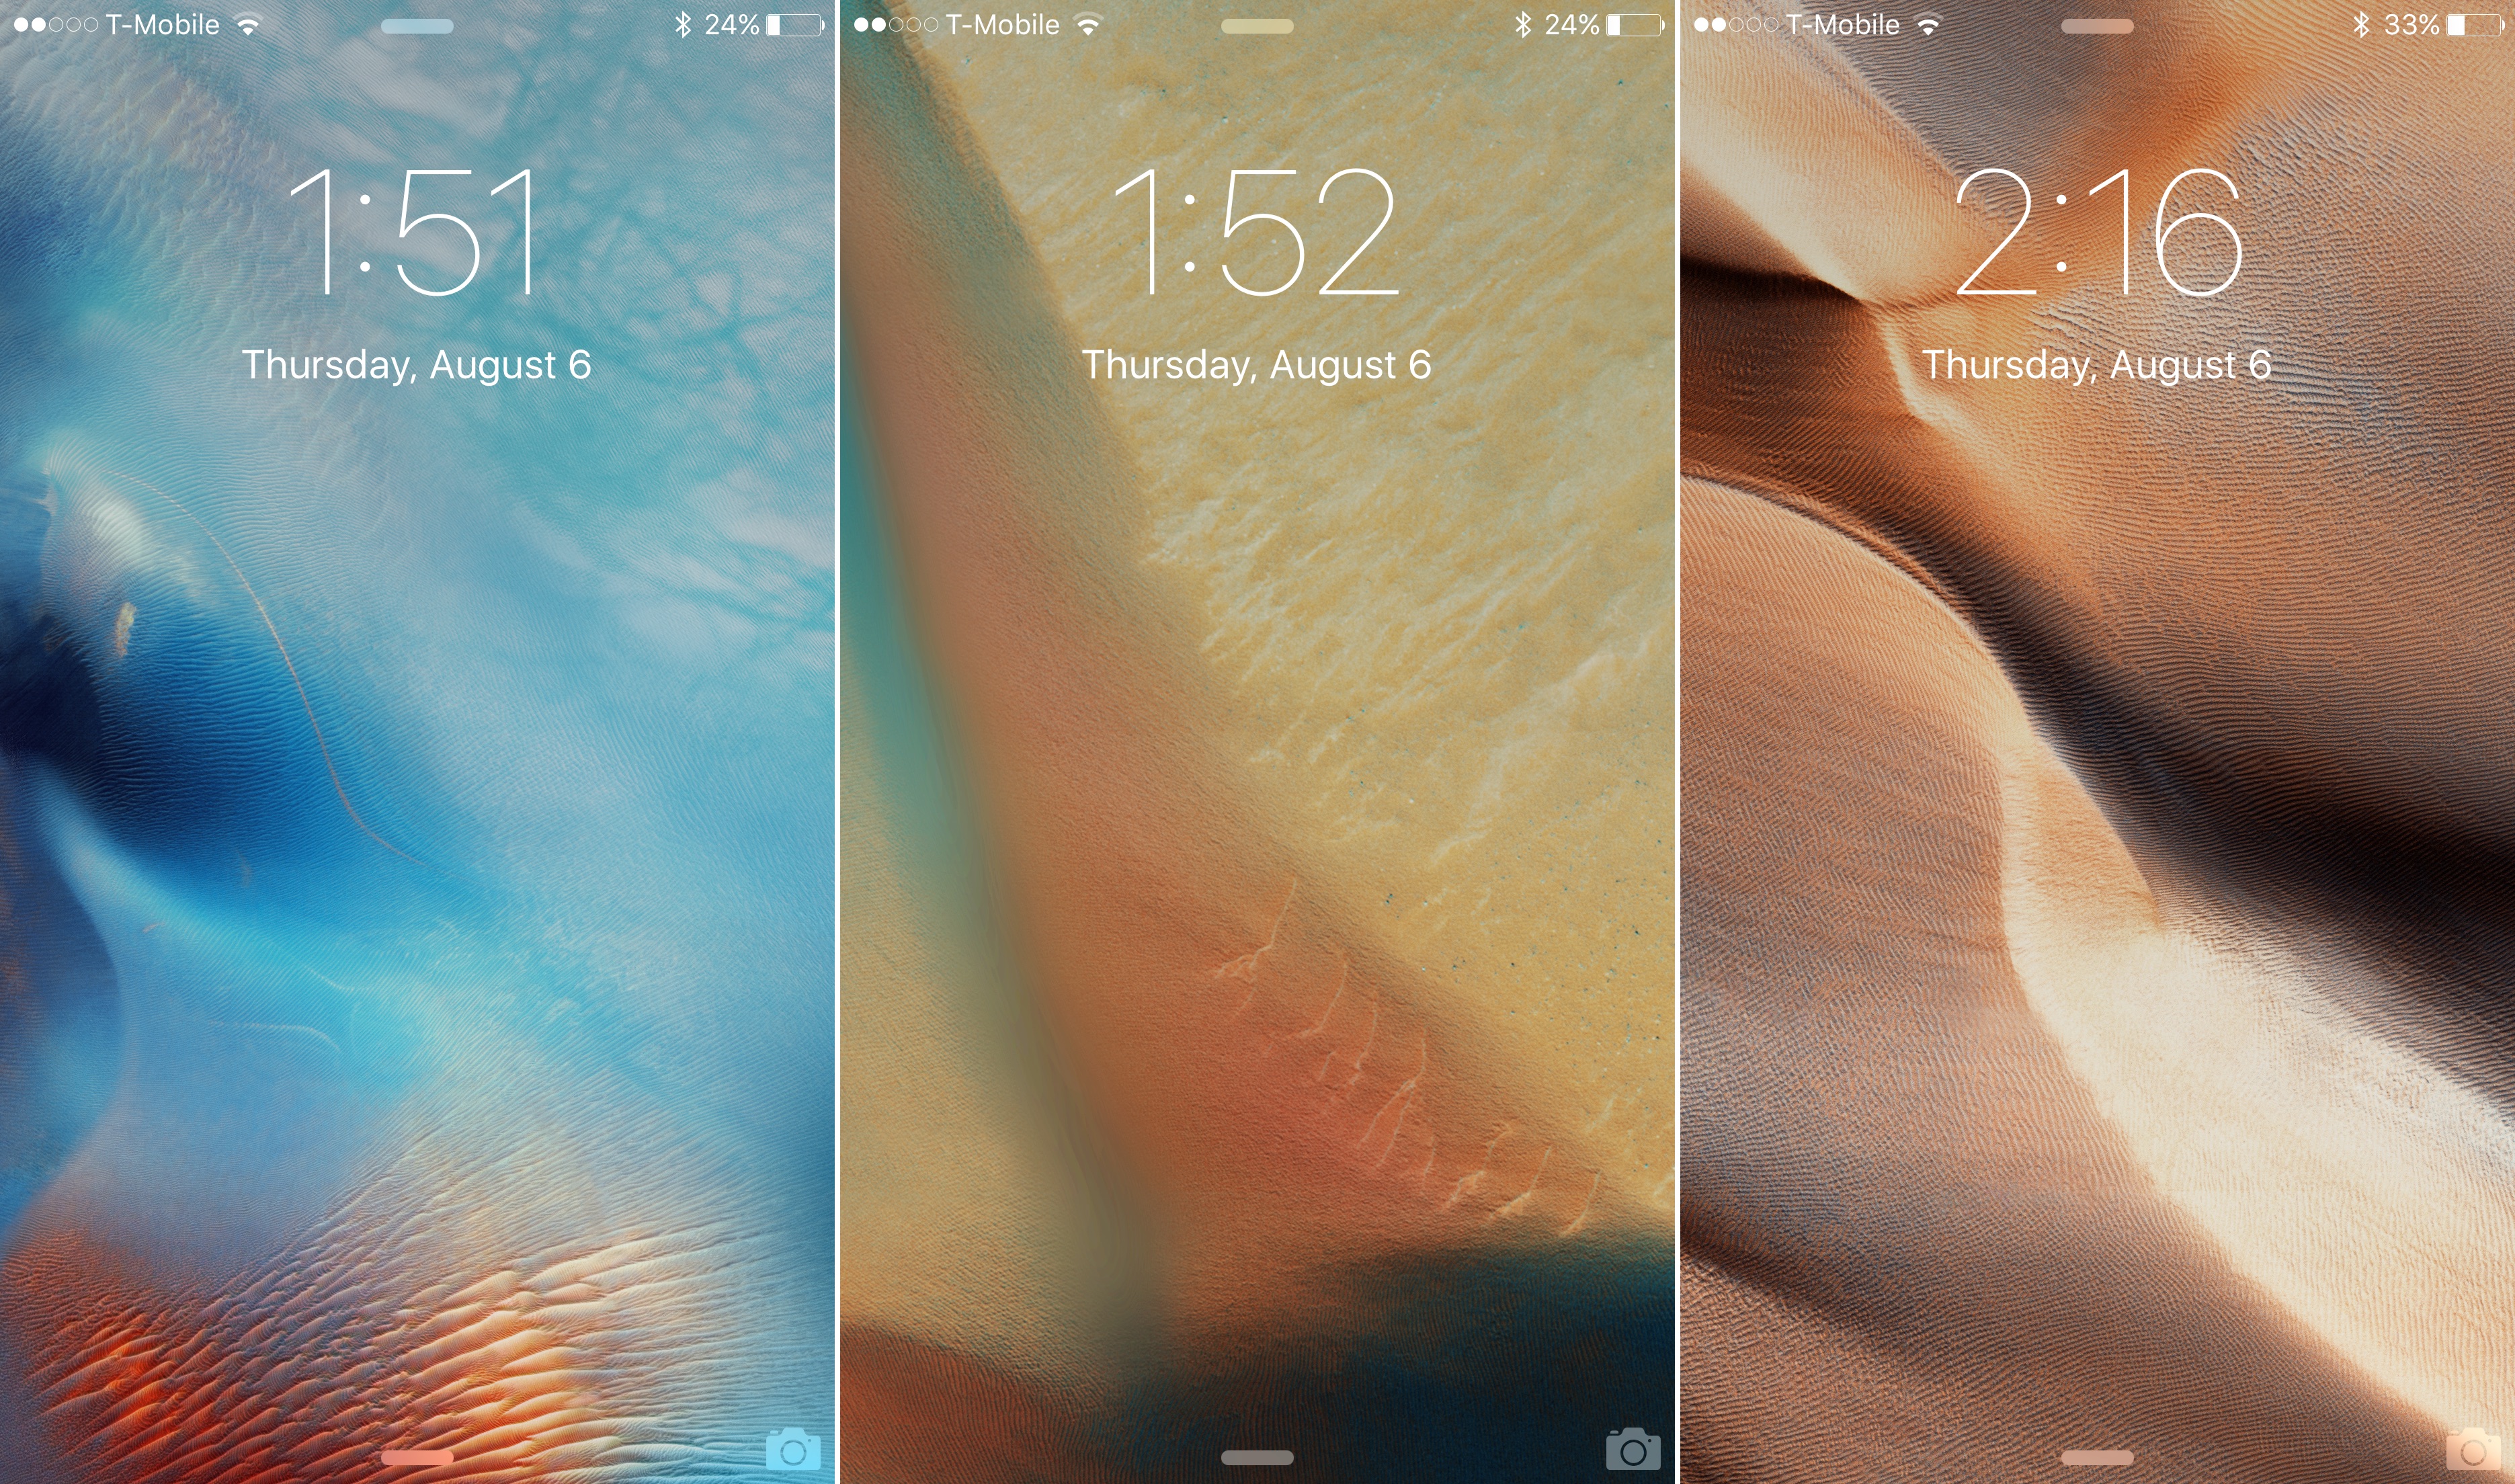 A look at the 15 new wallpapers in iOS 9 beta 5